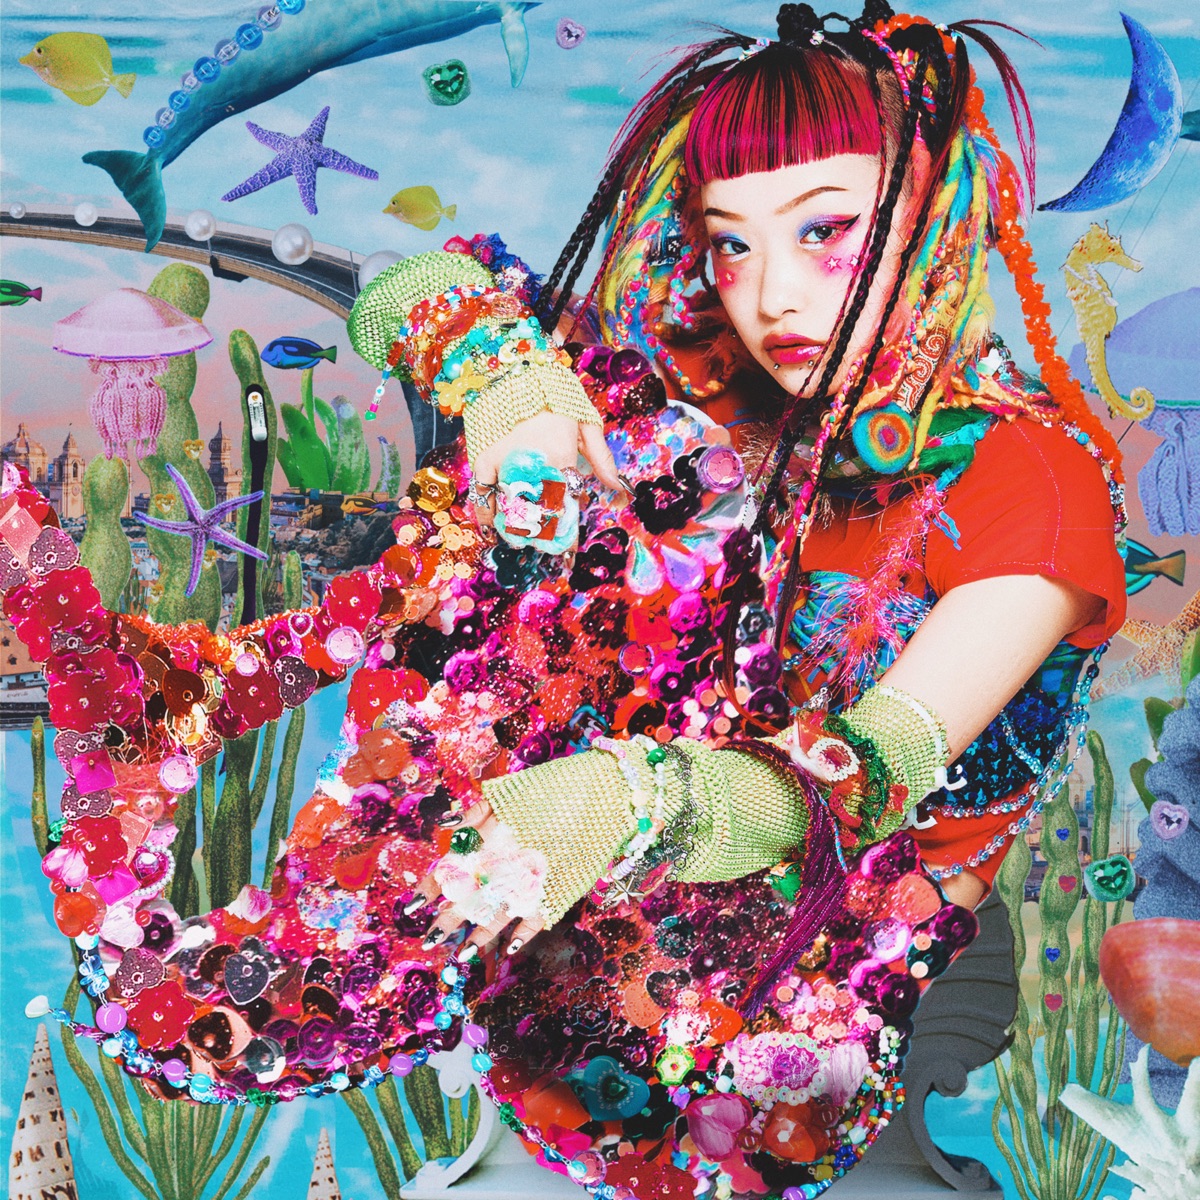 Cover image of『WEDNESDAY CAMPANELLAMermaid』from the Album『Mermaid』